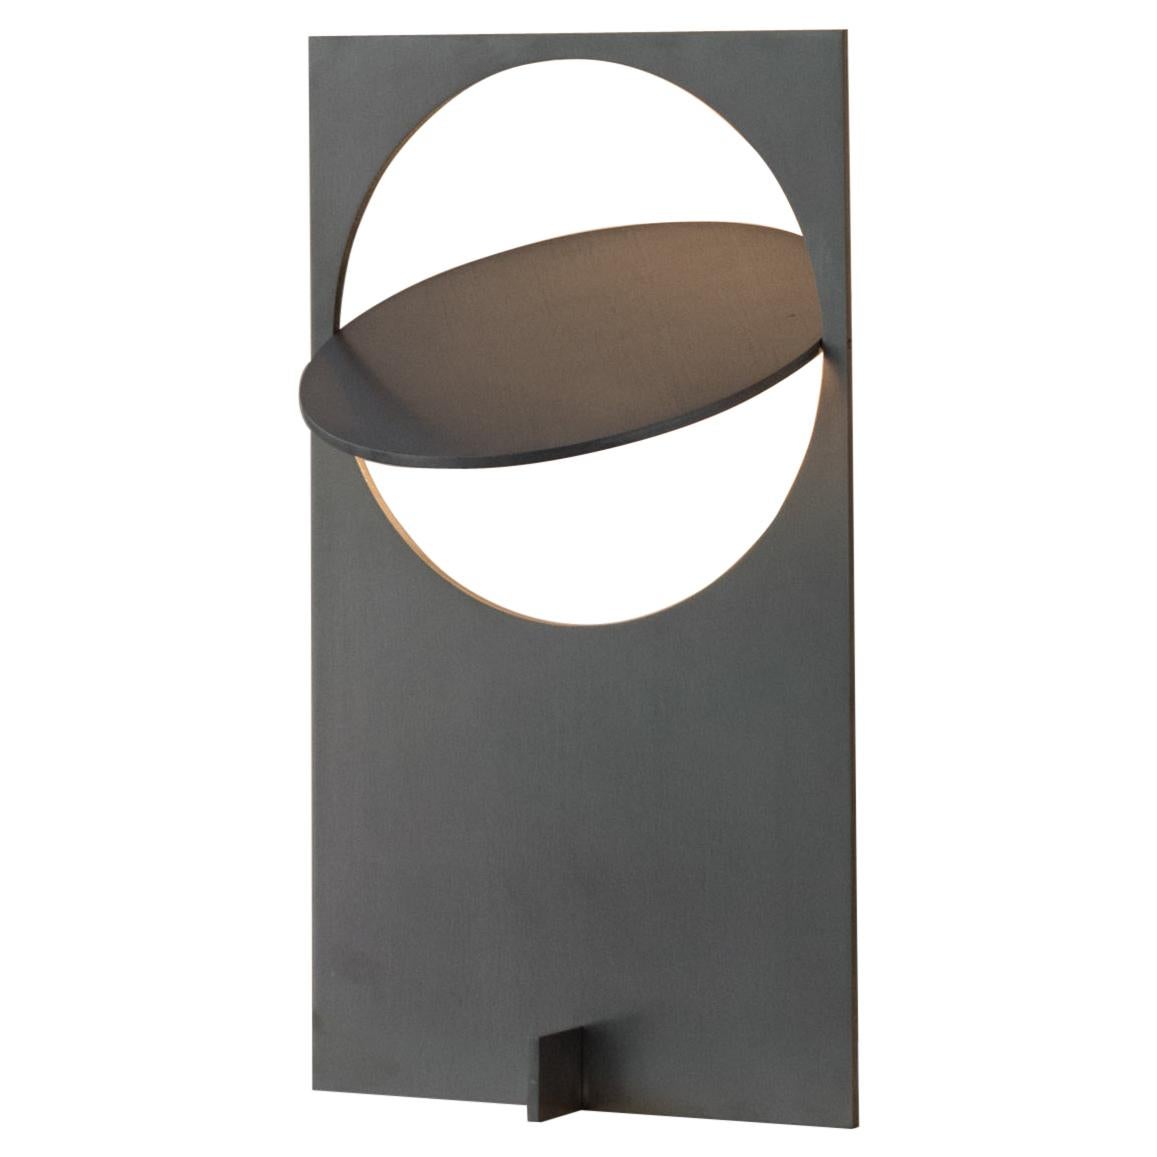 OBJ-01 Stainless Steel Table Lamp by Manu Bano